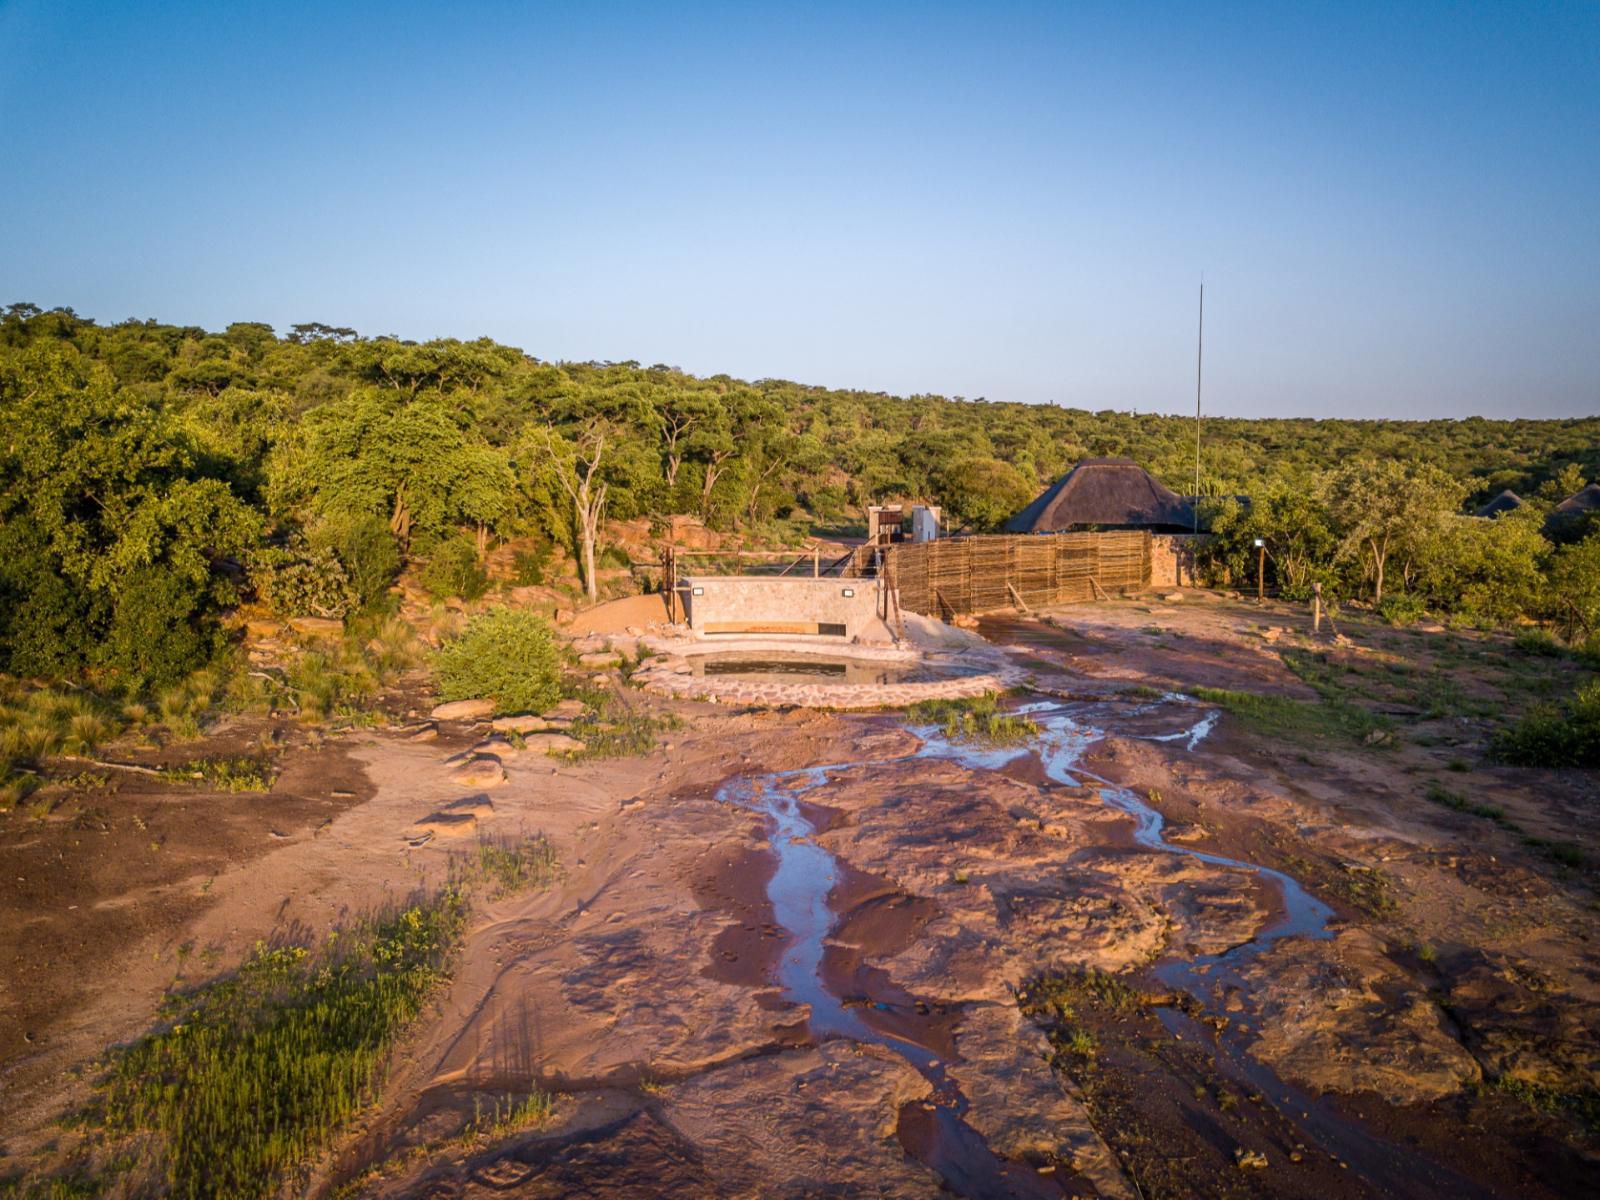 Laluka Safari Lodge Welgevonden Game Reserve Limpopo Province South Africa Complementary Colors